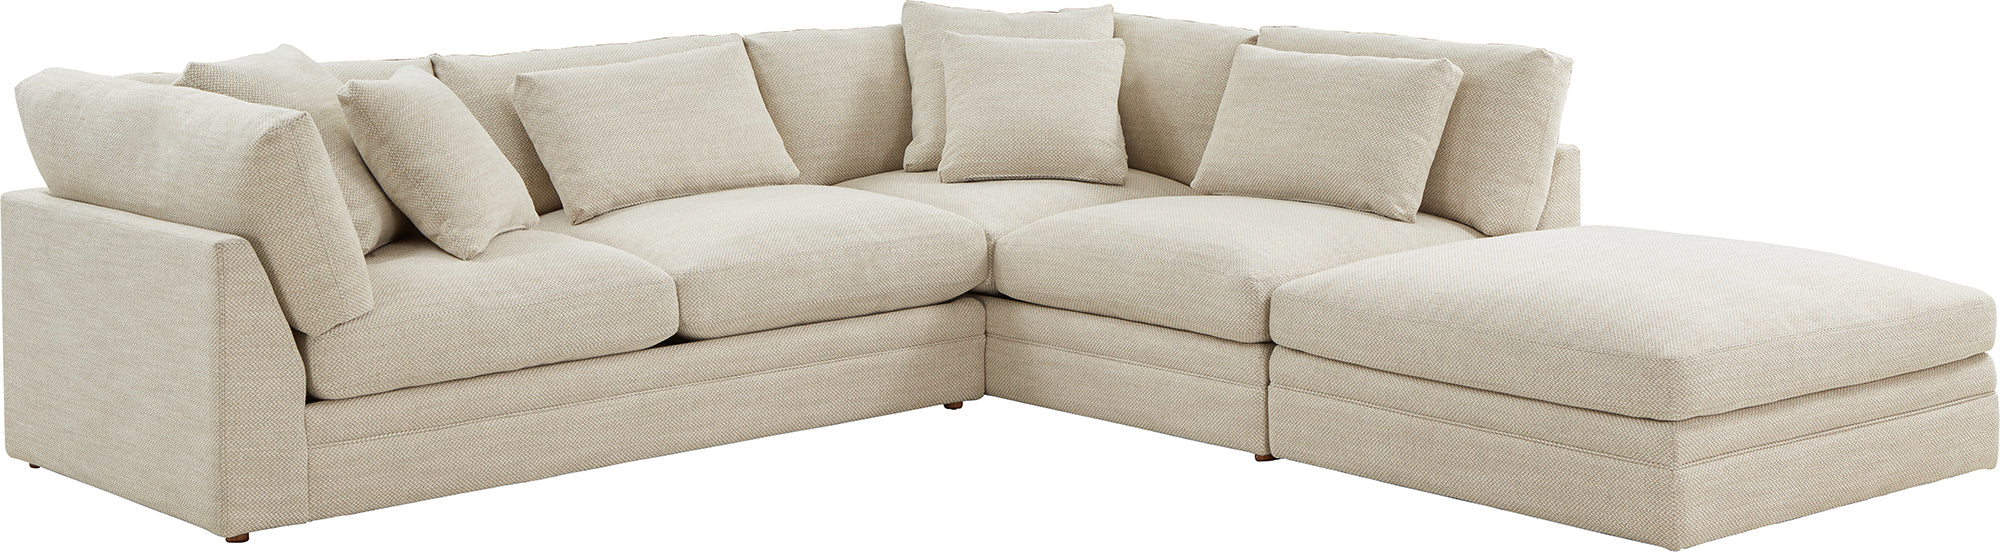 Feel Good Sectional with Ottoman, Right, Oyster - Image 3